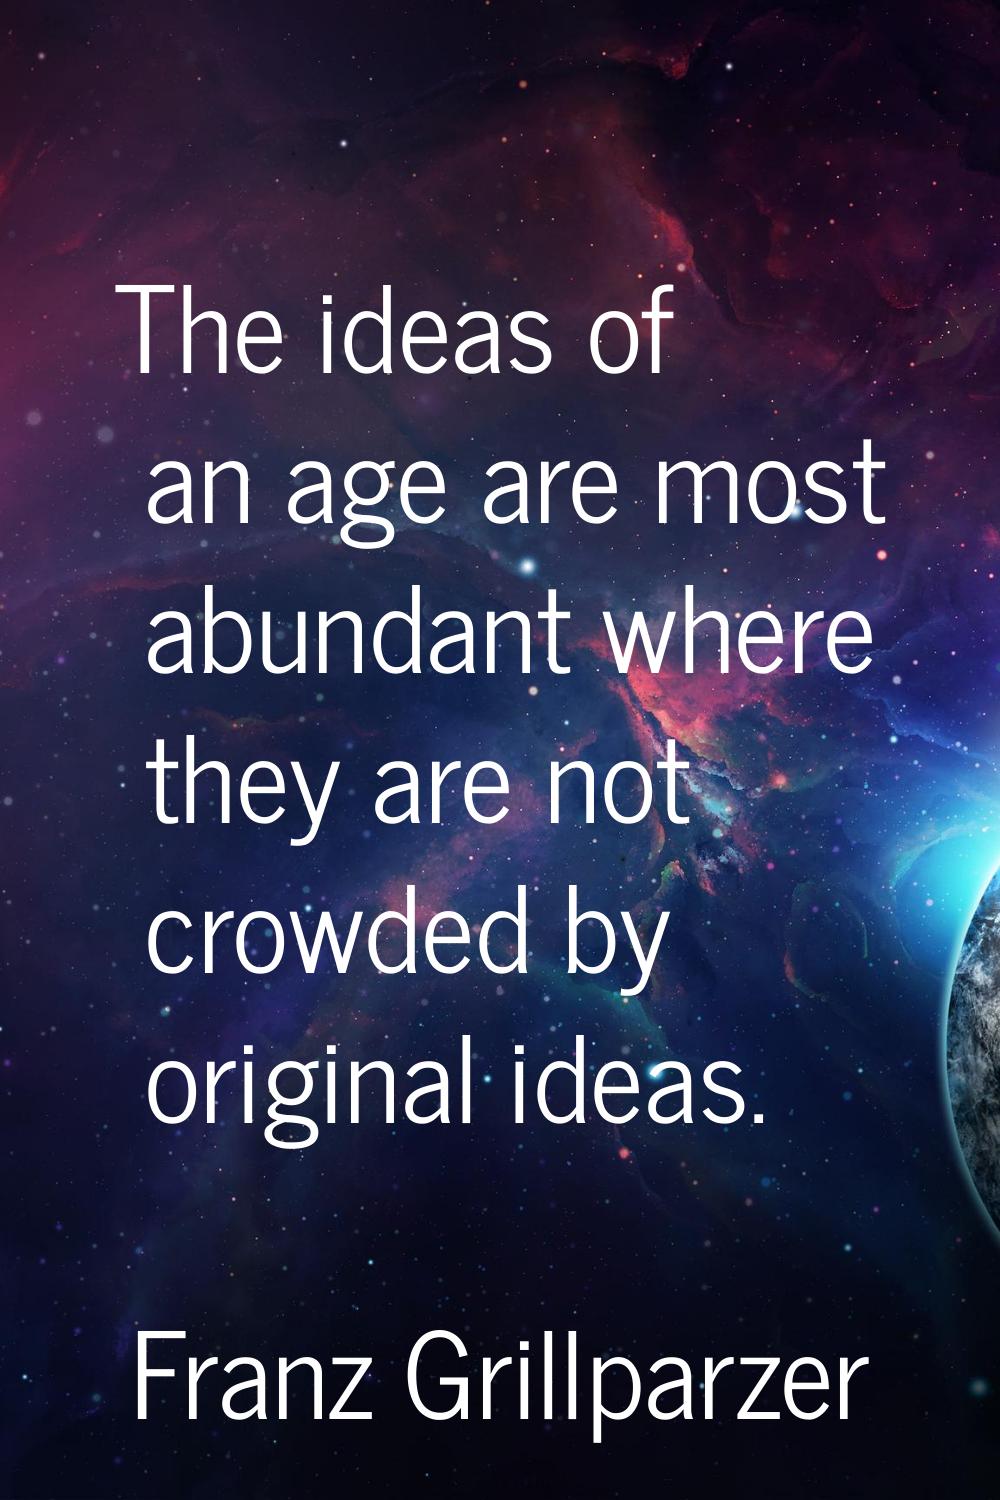 The ideas of an age are most abundant where they are not crowded by original ideas.